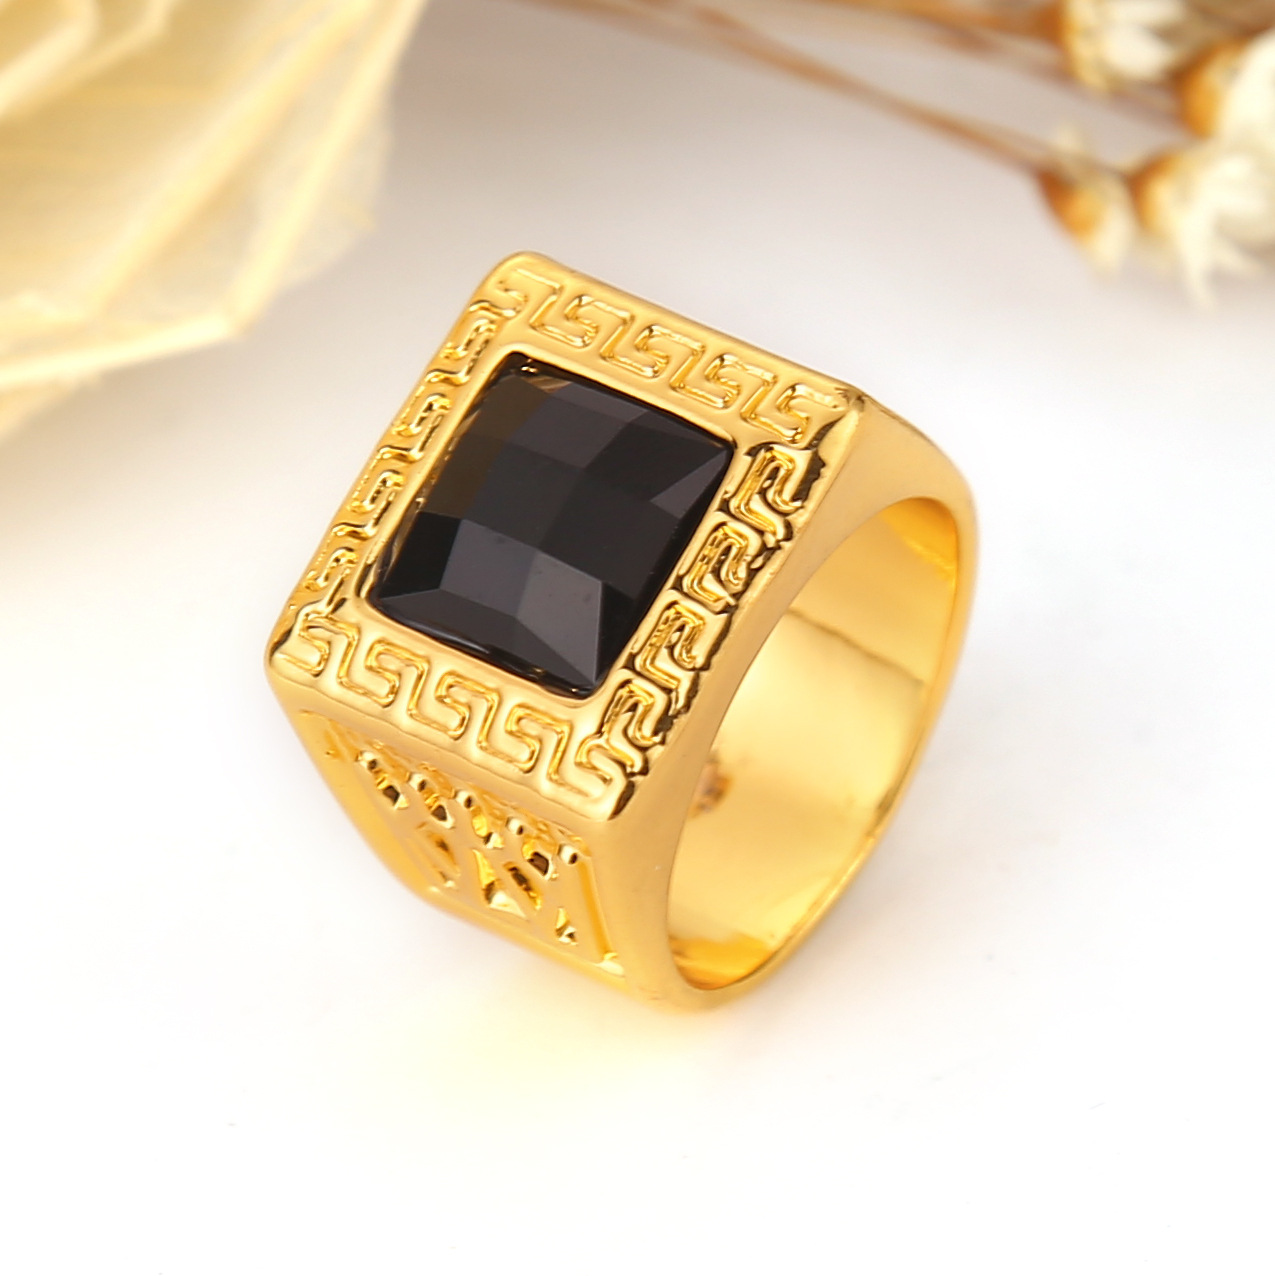 Hot Sale Black Resin Ring / Men Ring Gold Plated Vintage Jewelry For Sale-in Rings from Jewelry ...